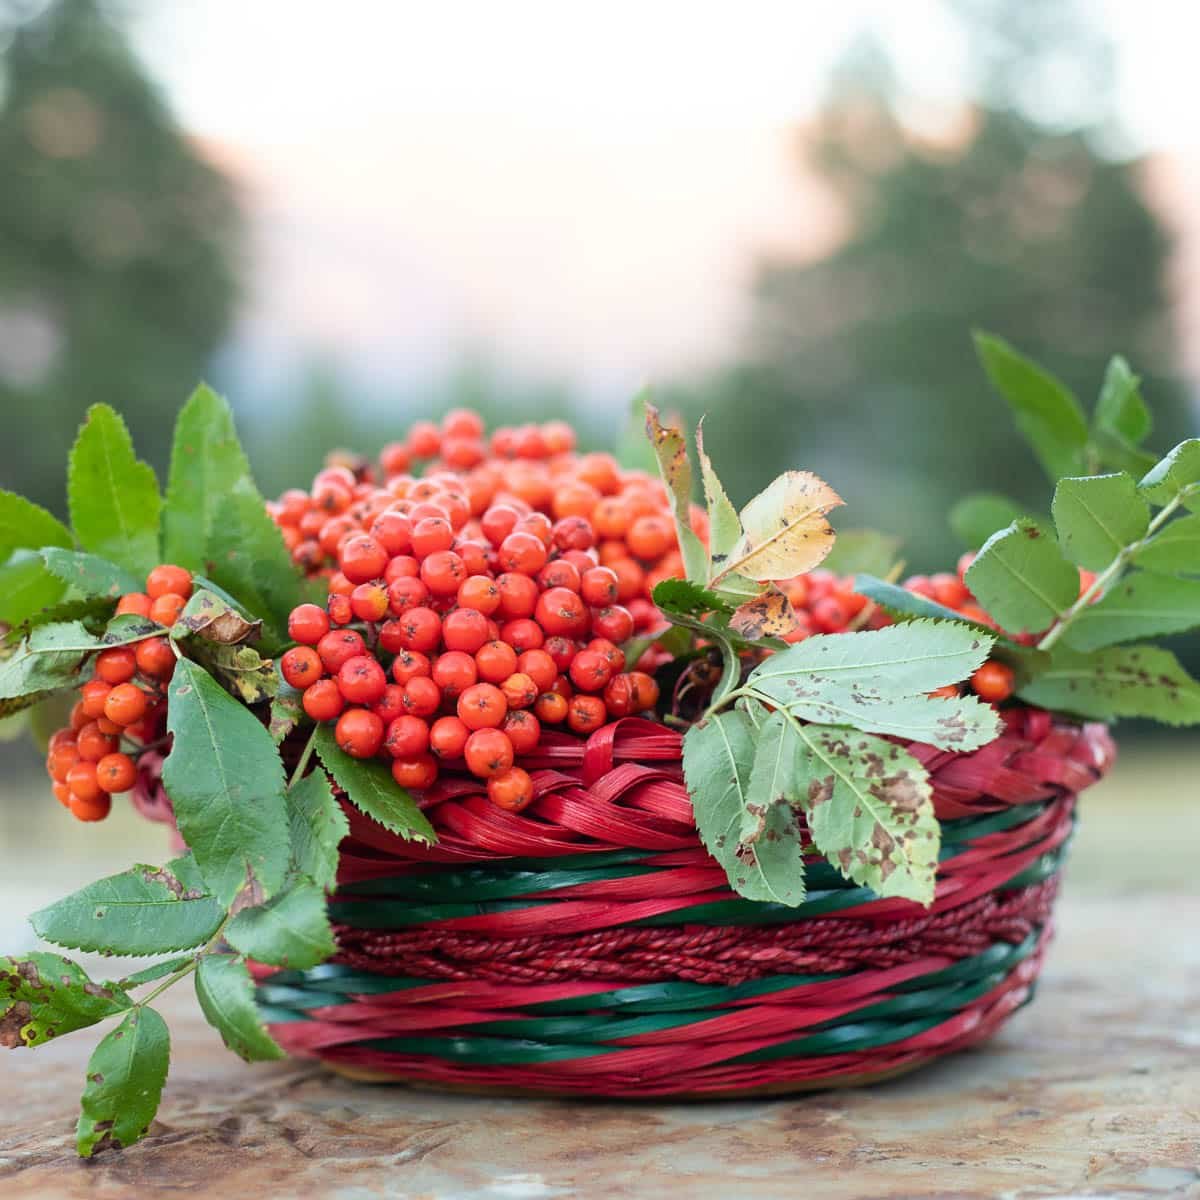 How to Forage and Use Rowanberries